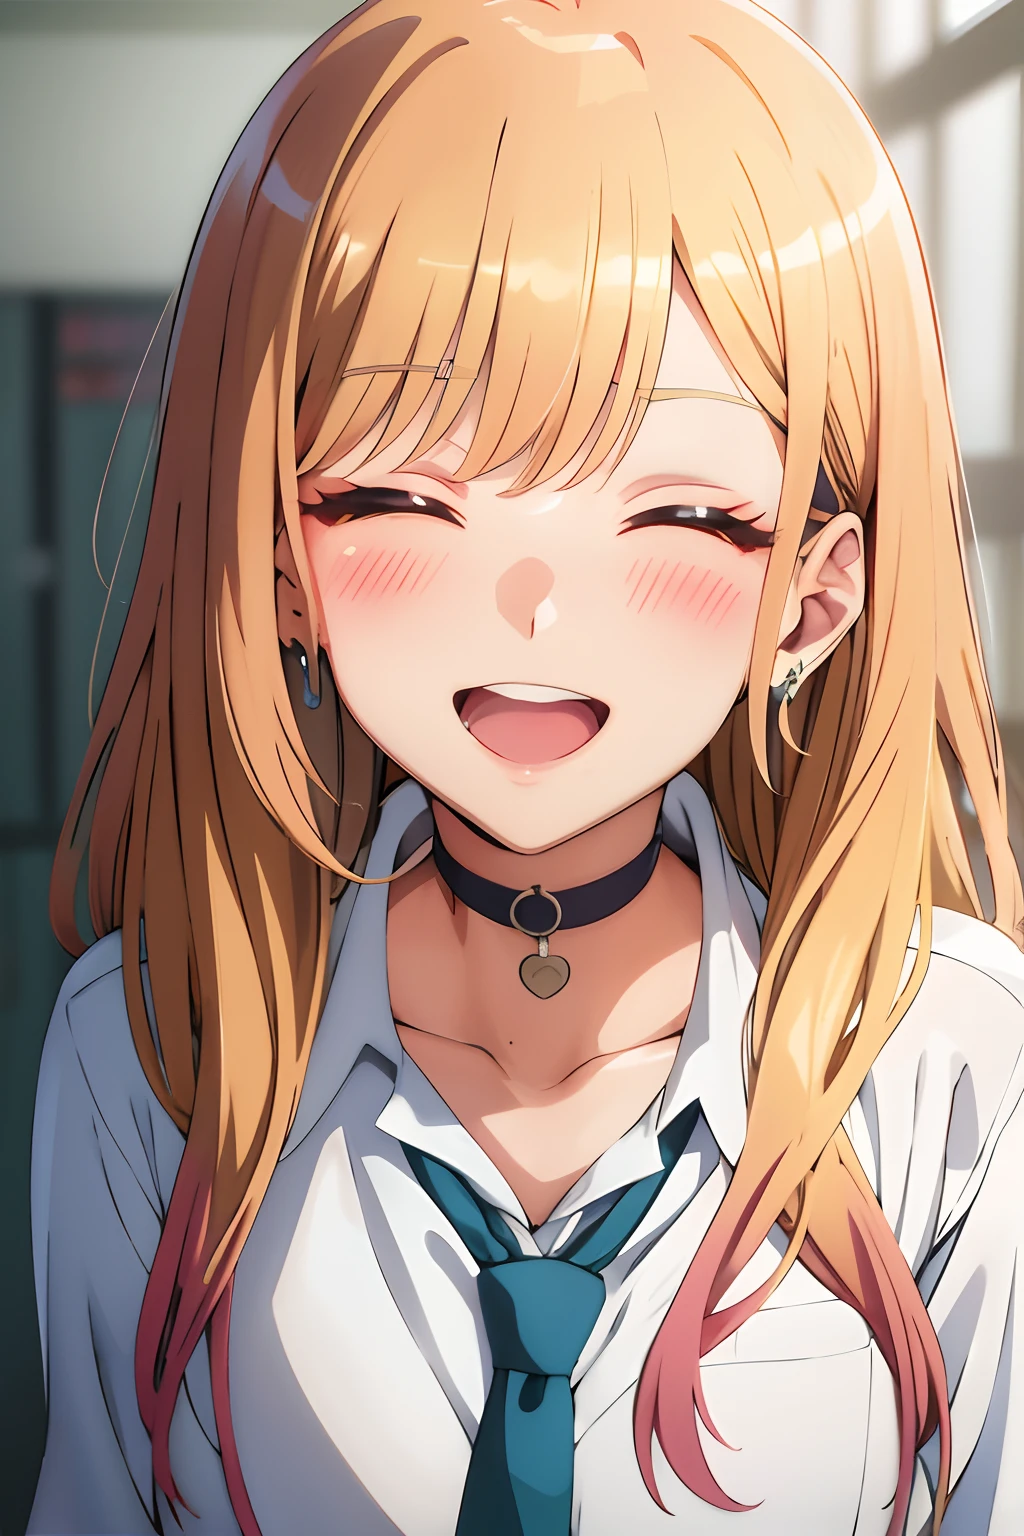 Anime girl with long blonde hair and blue tie in a white shirt, anime visual of a cute girl, blonde anime girl with long hair, cheerful grin, menina bonita do anime high school, anime visual of a young woman, extremely cute anime face, anime best girl,  from the anime called Lucy, cunning smile, anime portrait of shiina ringo